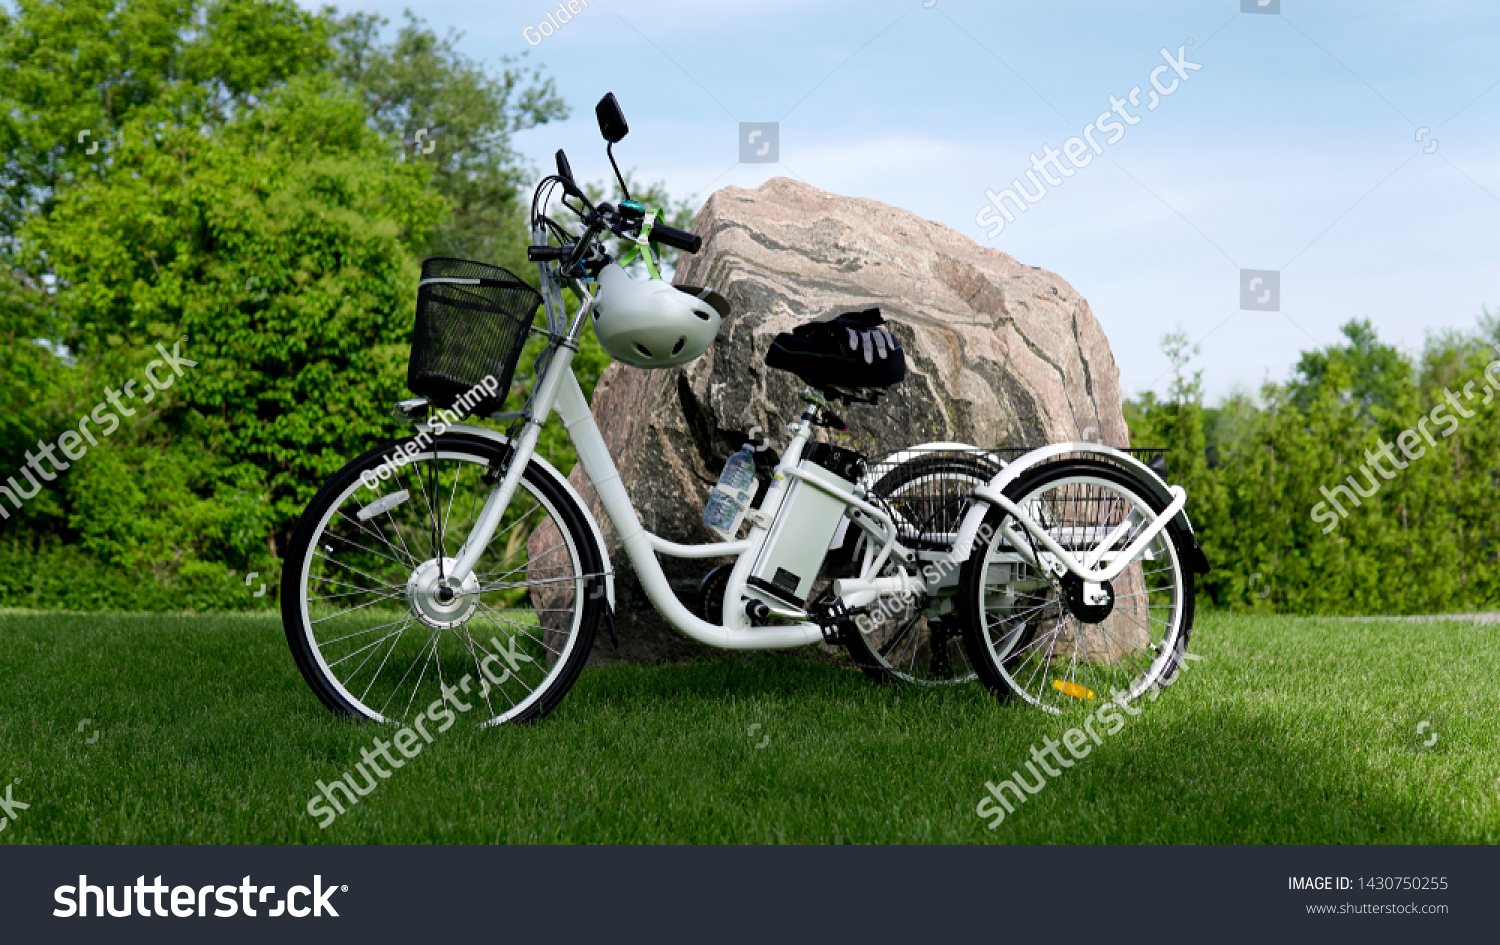 Electric bicycle on the green grass with stone background on sunny summer day. Shot from the side. A lot of natural lighting. The view of the e motor, power battery gear, hamlet and gloves. #1430750255